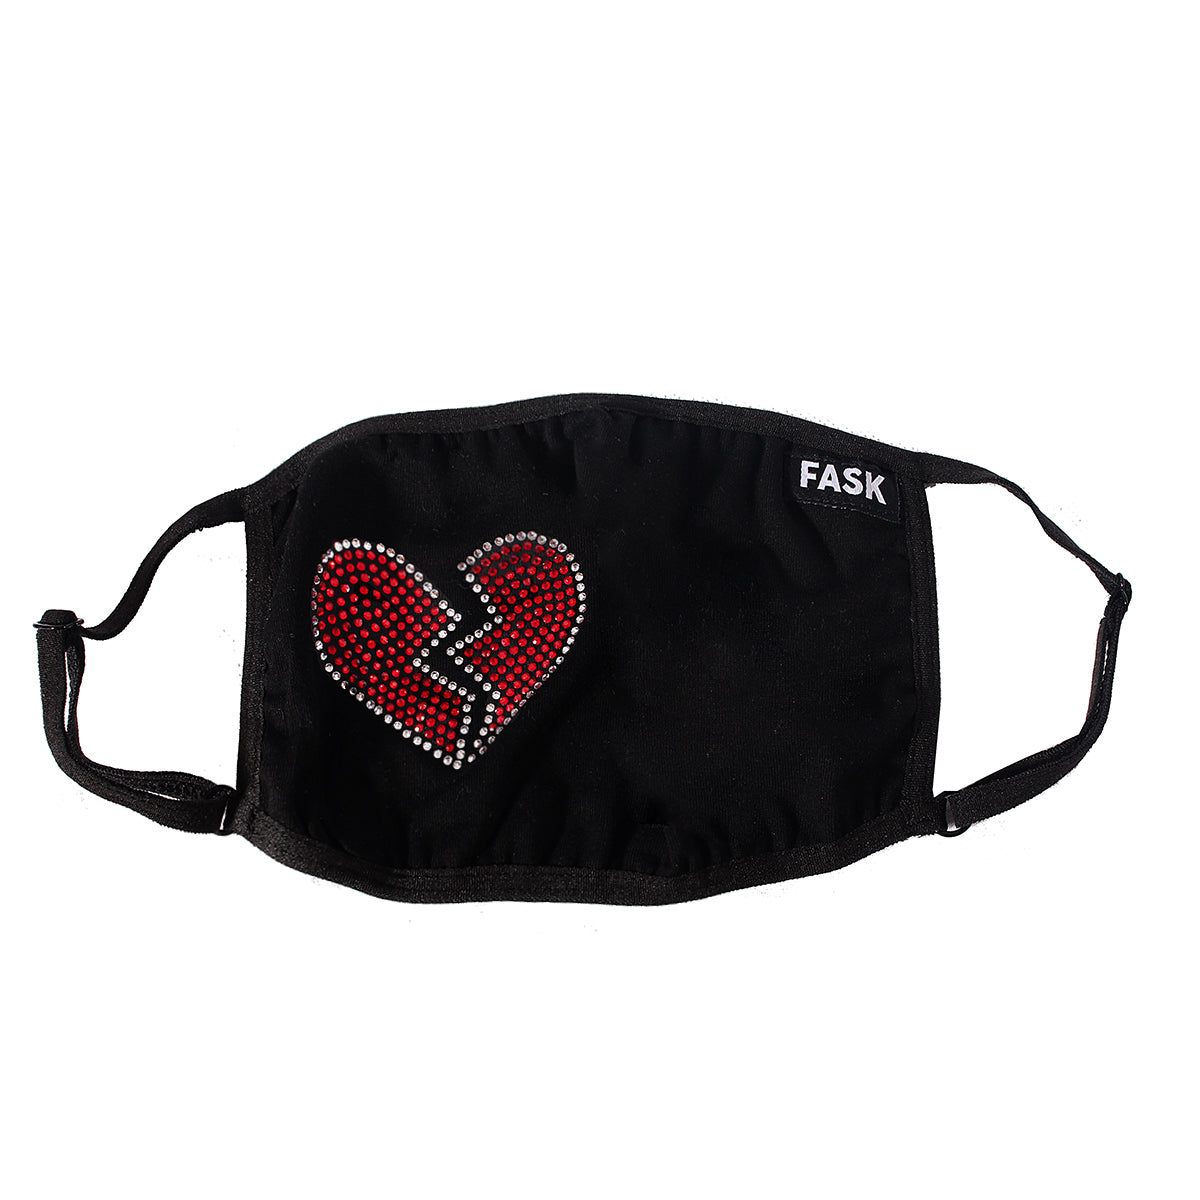 FASK Broken Heart Cotton 2.0 Stoned Mask with Interchangeable Filter and Adjustable Size Strap